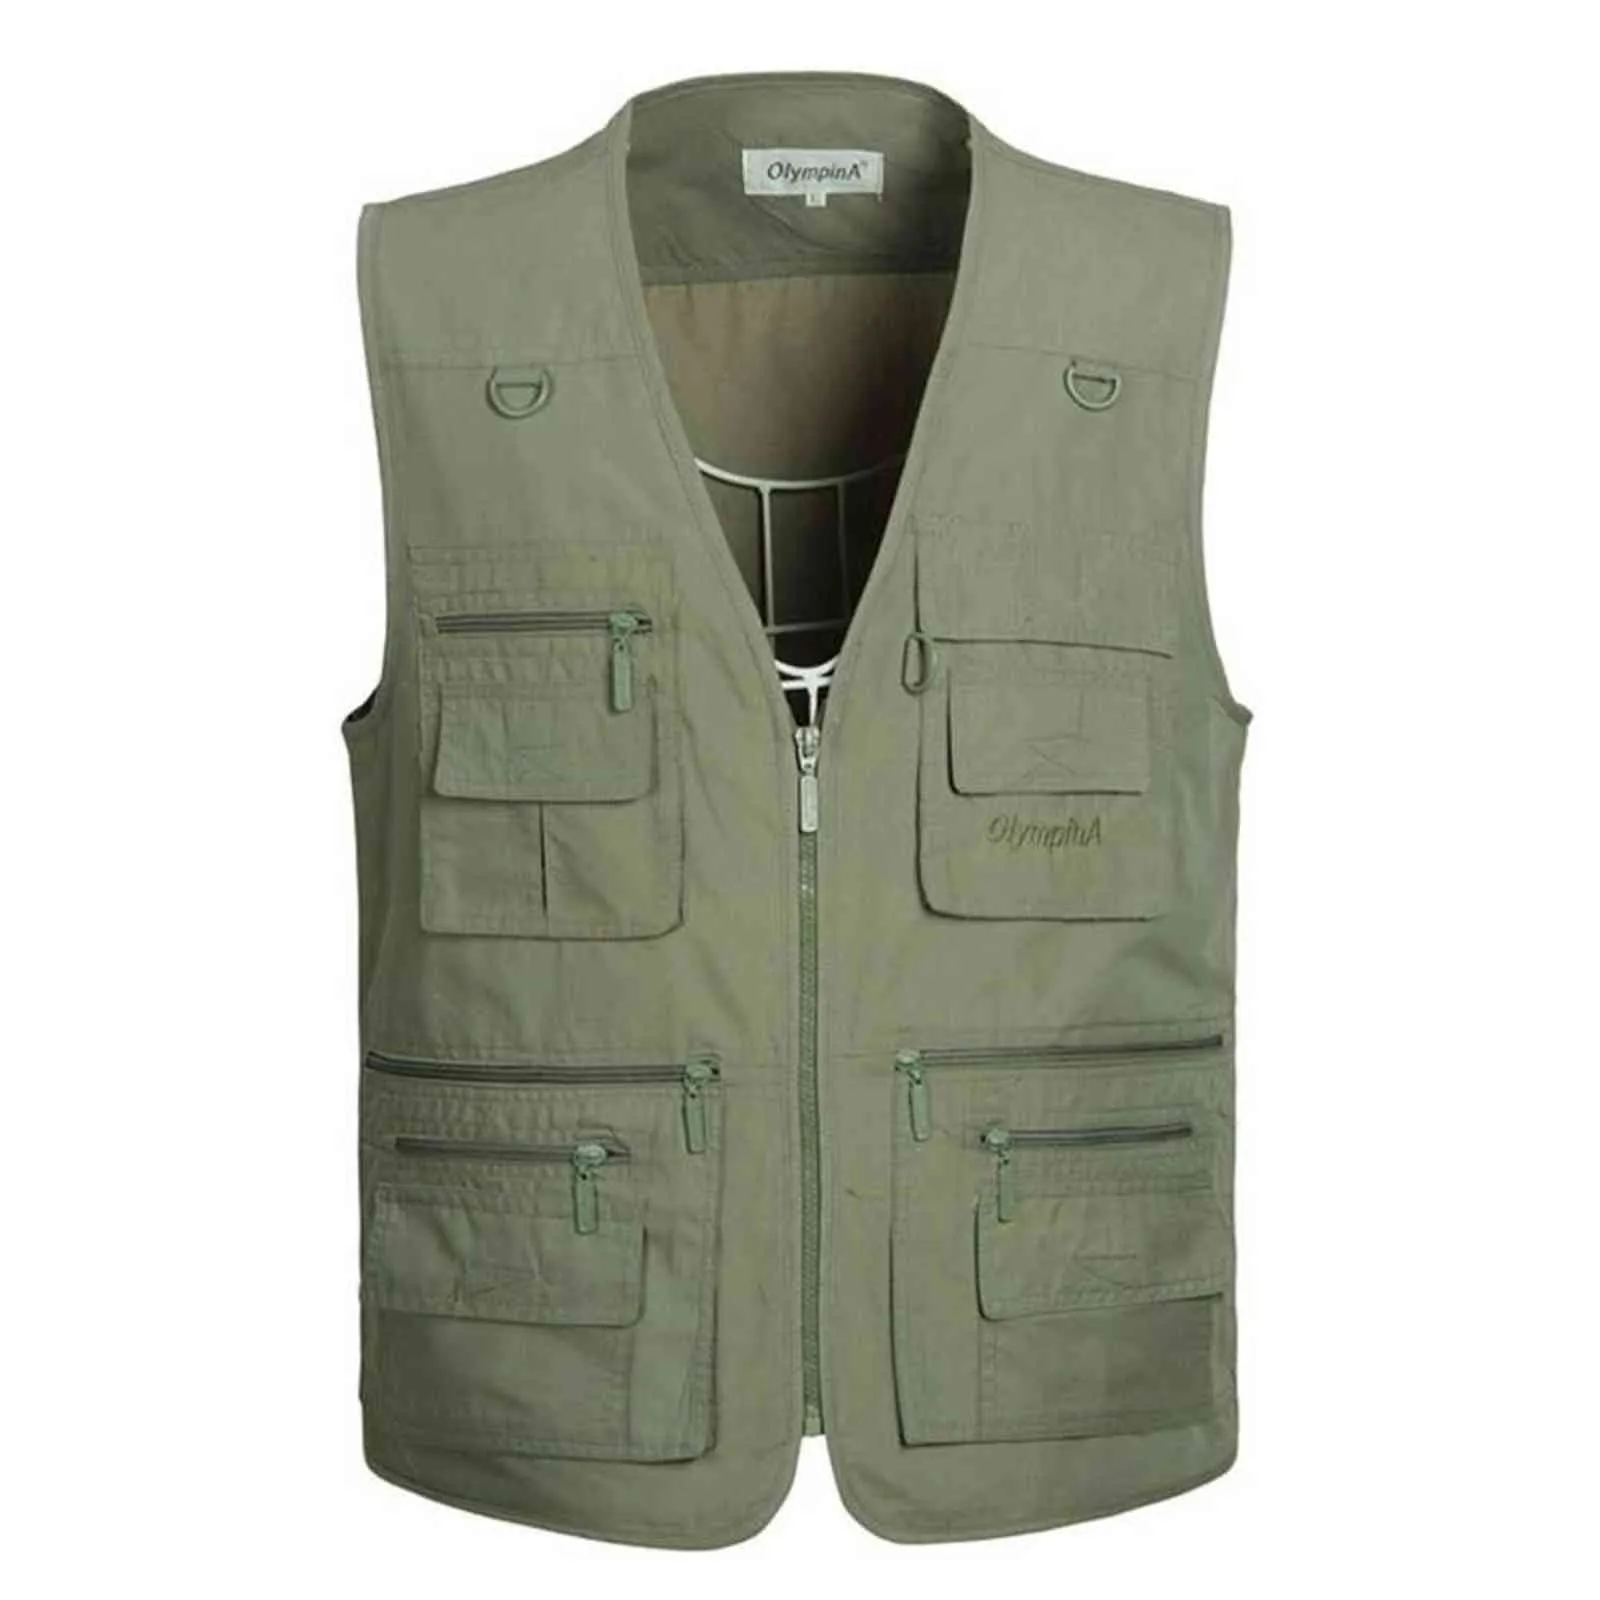 Large Quick Drying Work Vest For Men Sleeveless Cargo Vest With